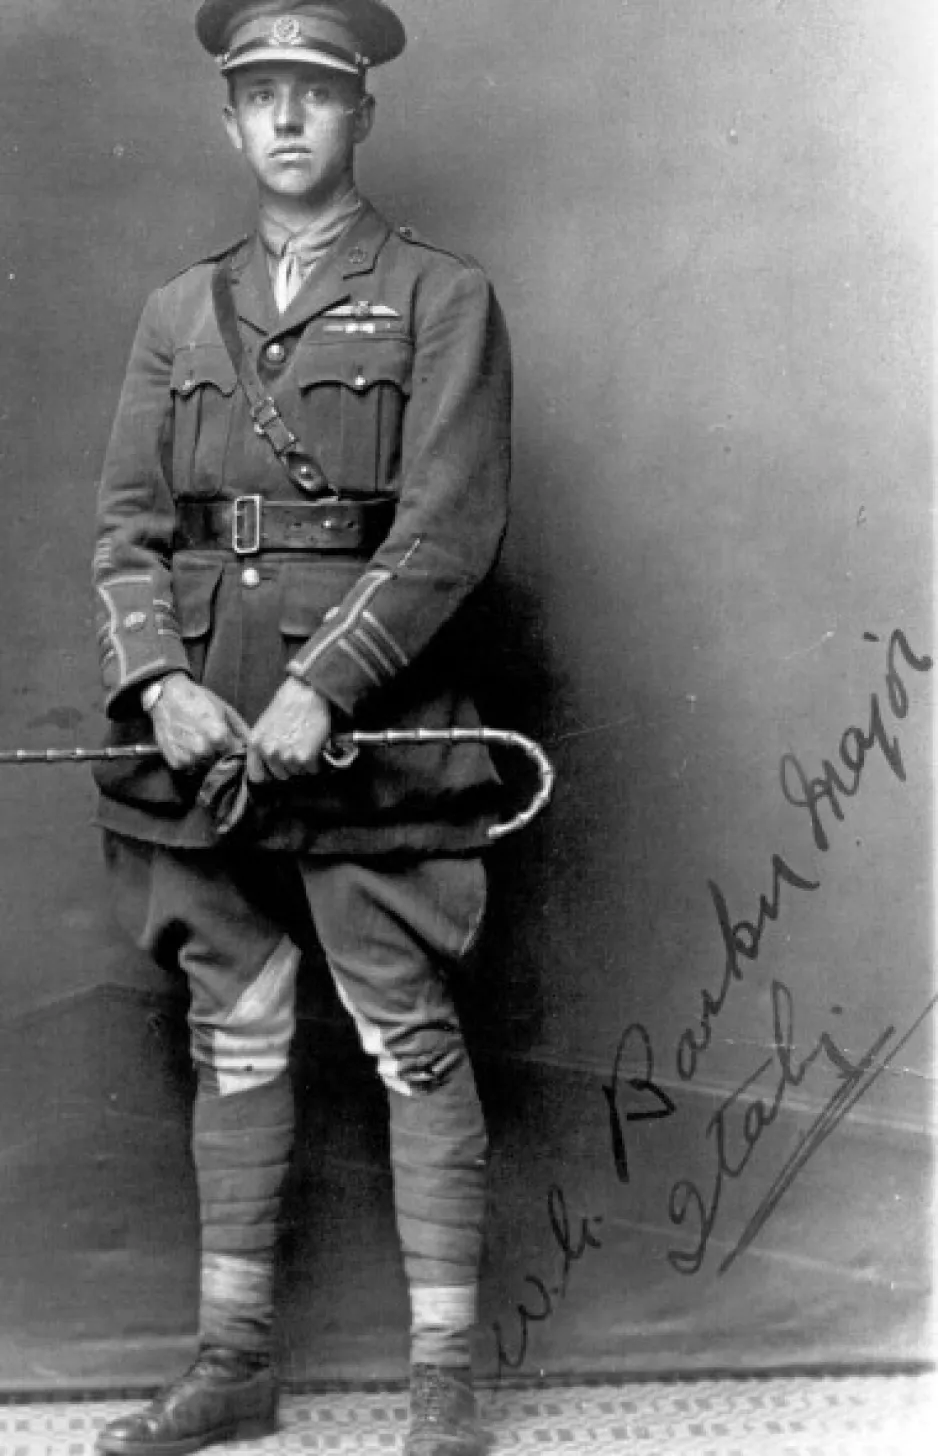 A full-body photo of William George Barker, with his autograph visible in the bottom right corner.